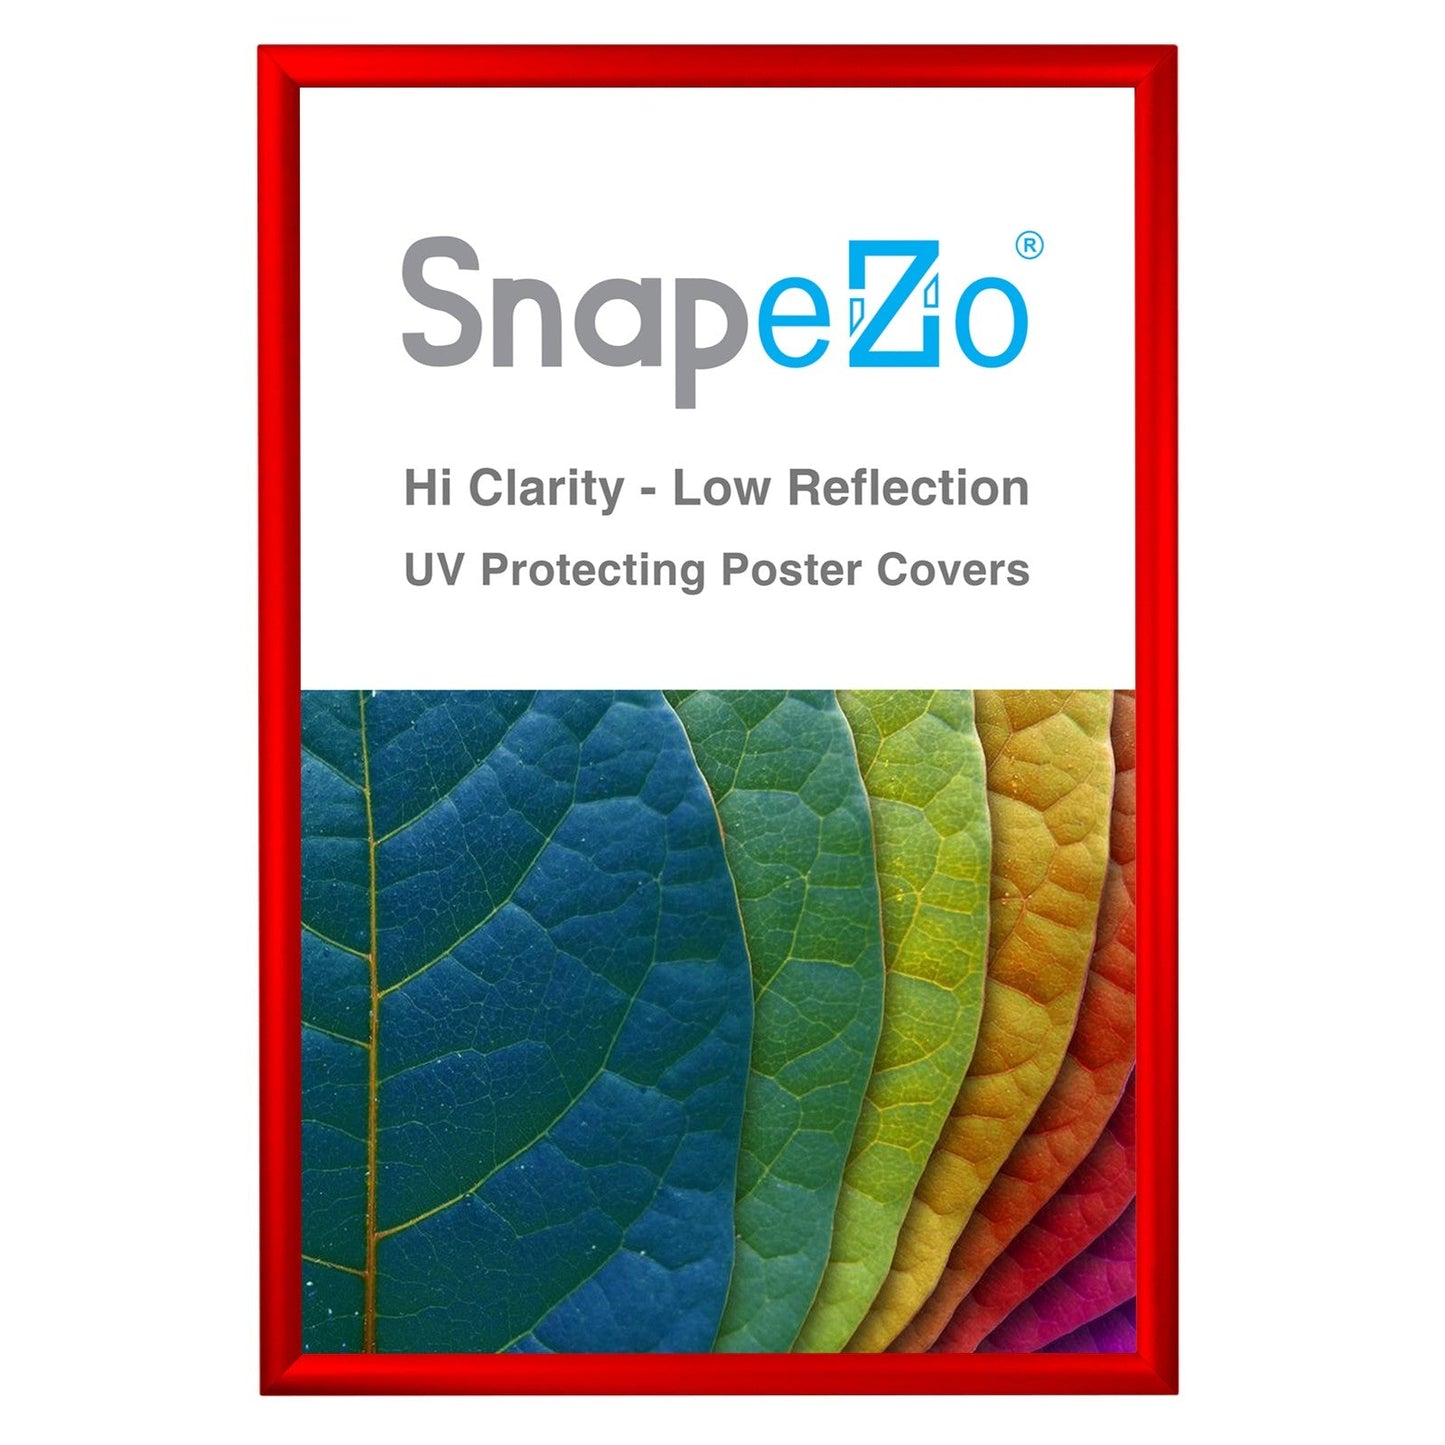 Load image into Gallery viewer, 23x35 Red SnapeZo® Snap Frame - 1.2&amp;quot; Profile
